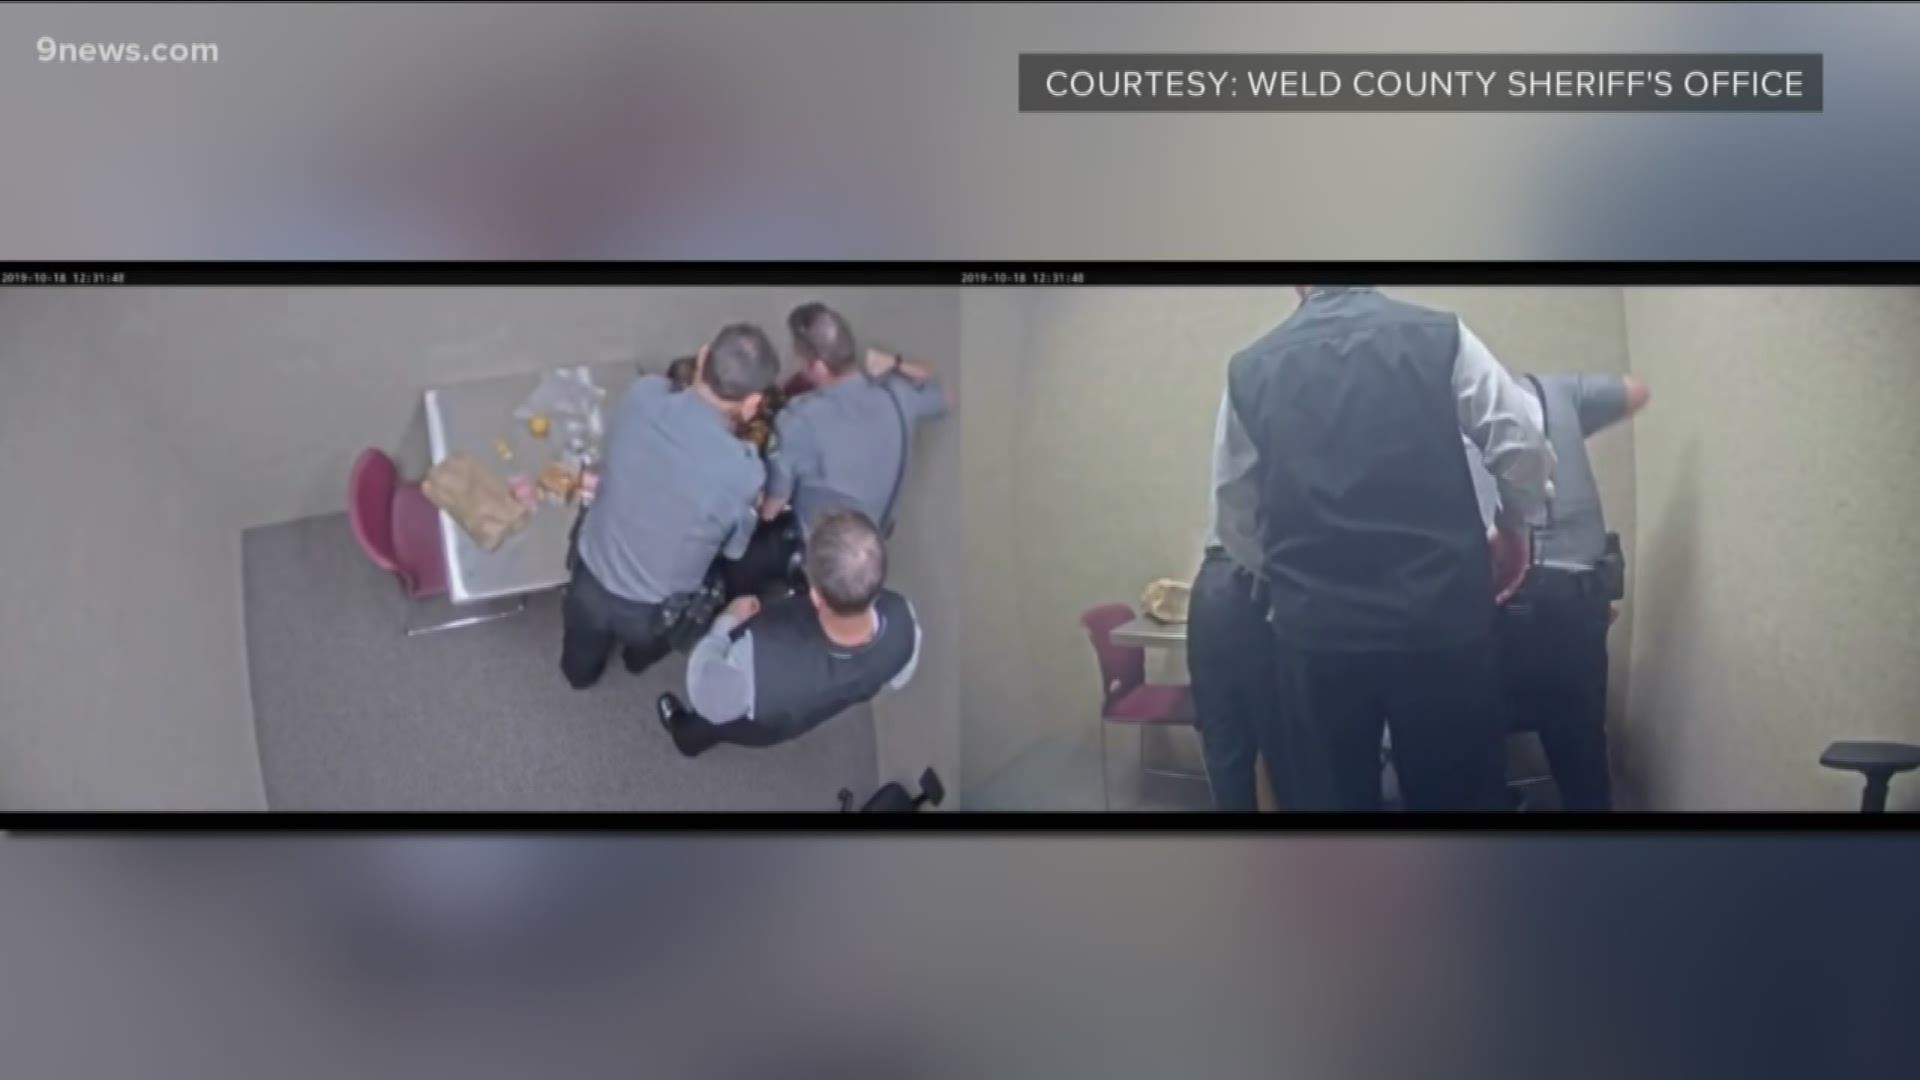 The incident happened while the suspect was being held in an interview room at the Weld County Sheriff's Office.